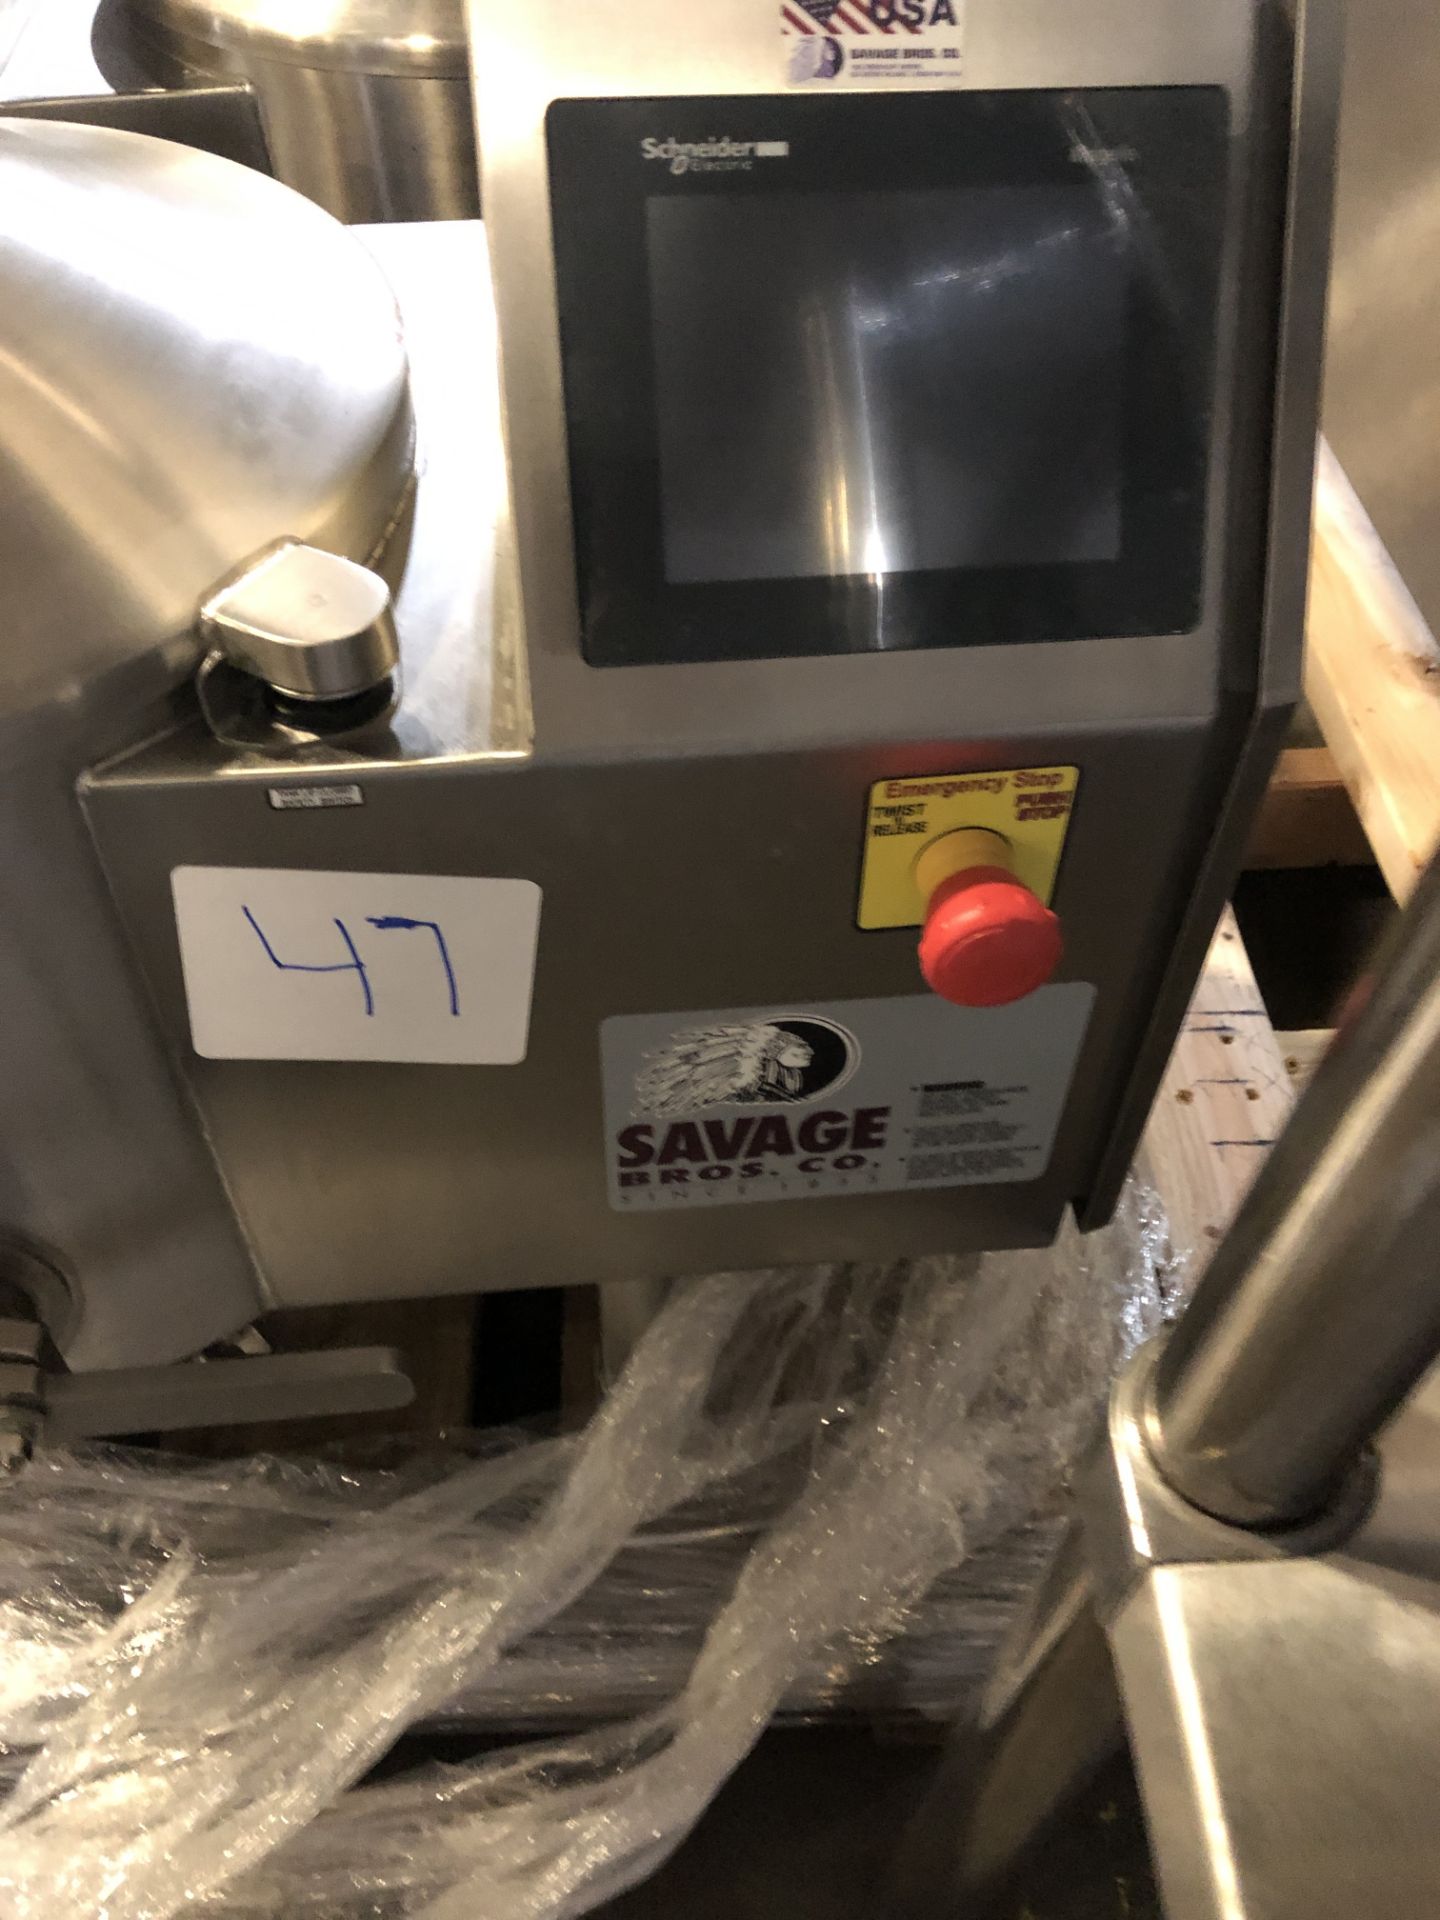 Savage 50-lb Stainless Steel Chocolate Melter, model 0934-40, jacketed and agitated, electrically - Image 2 of 4